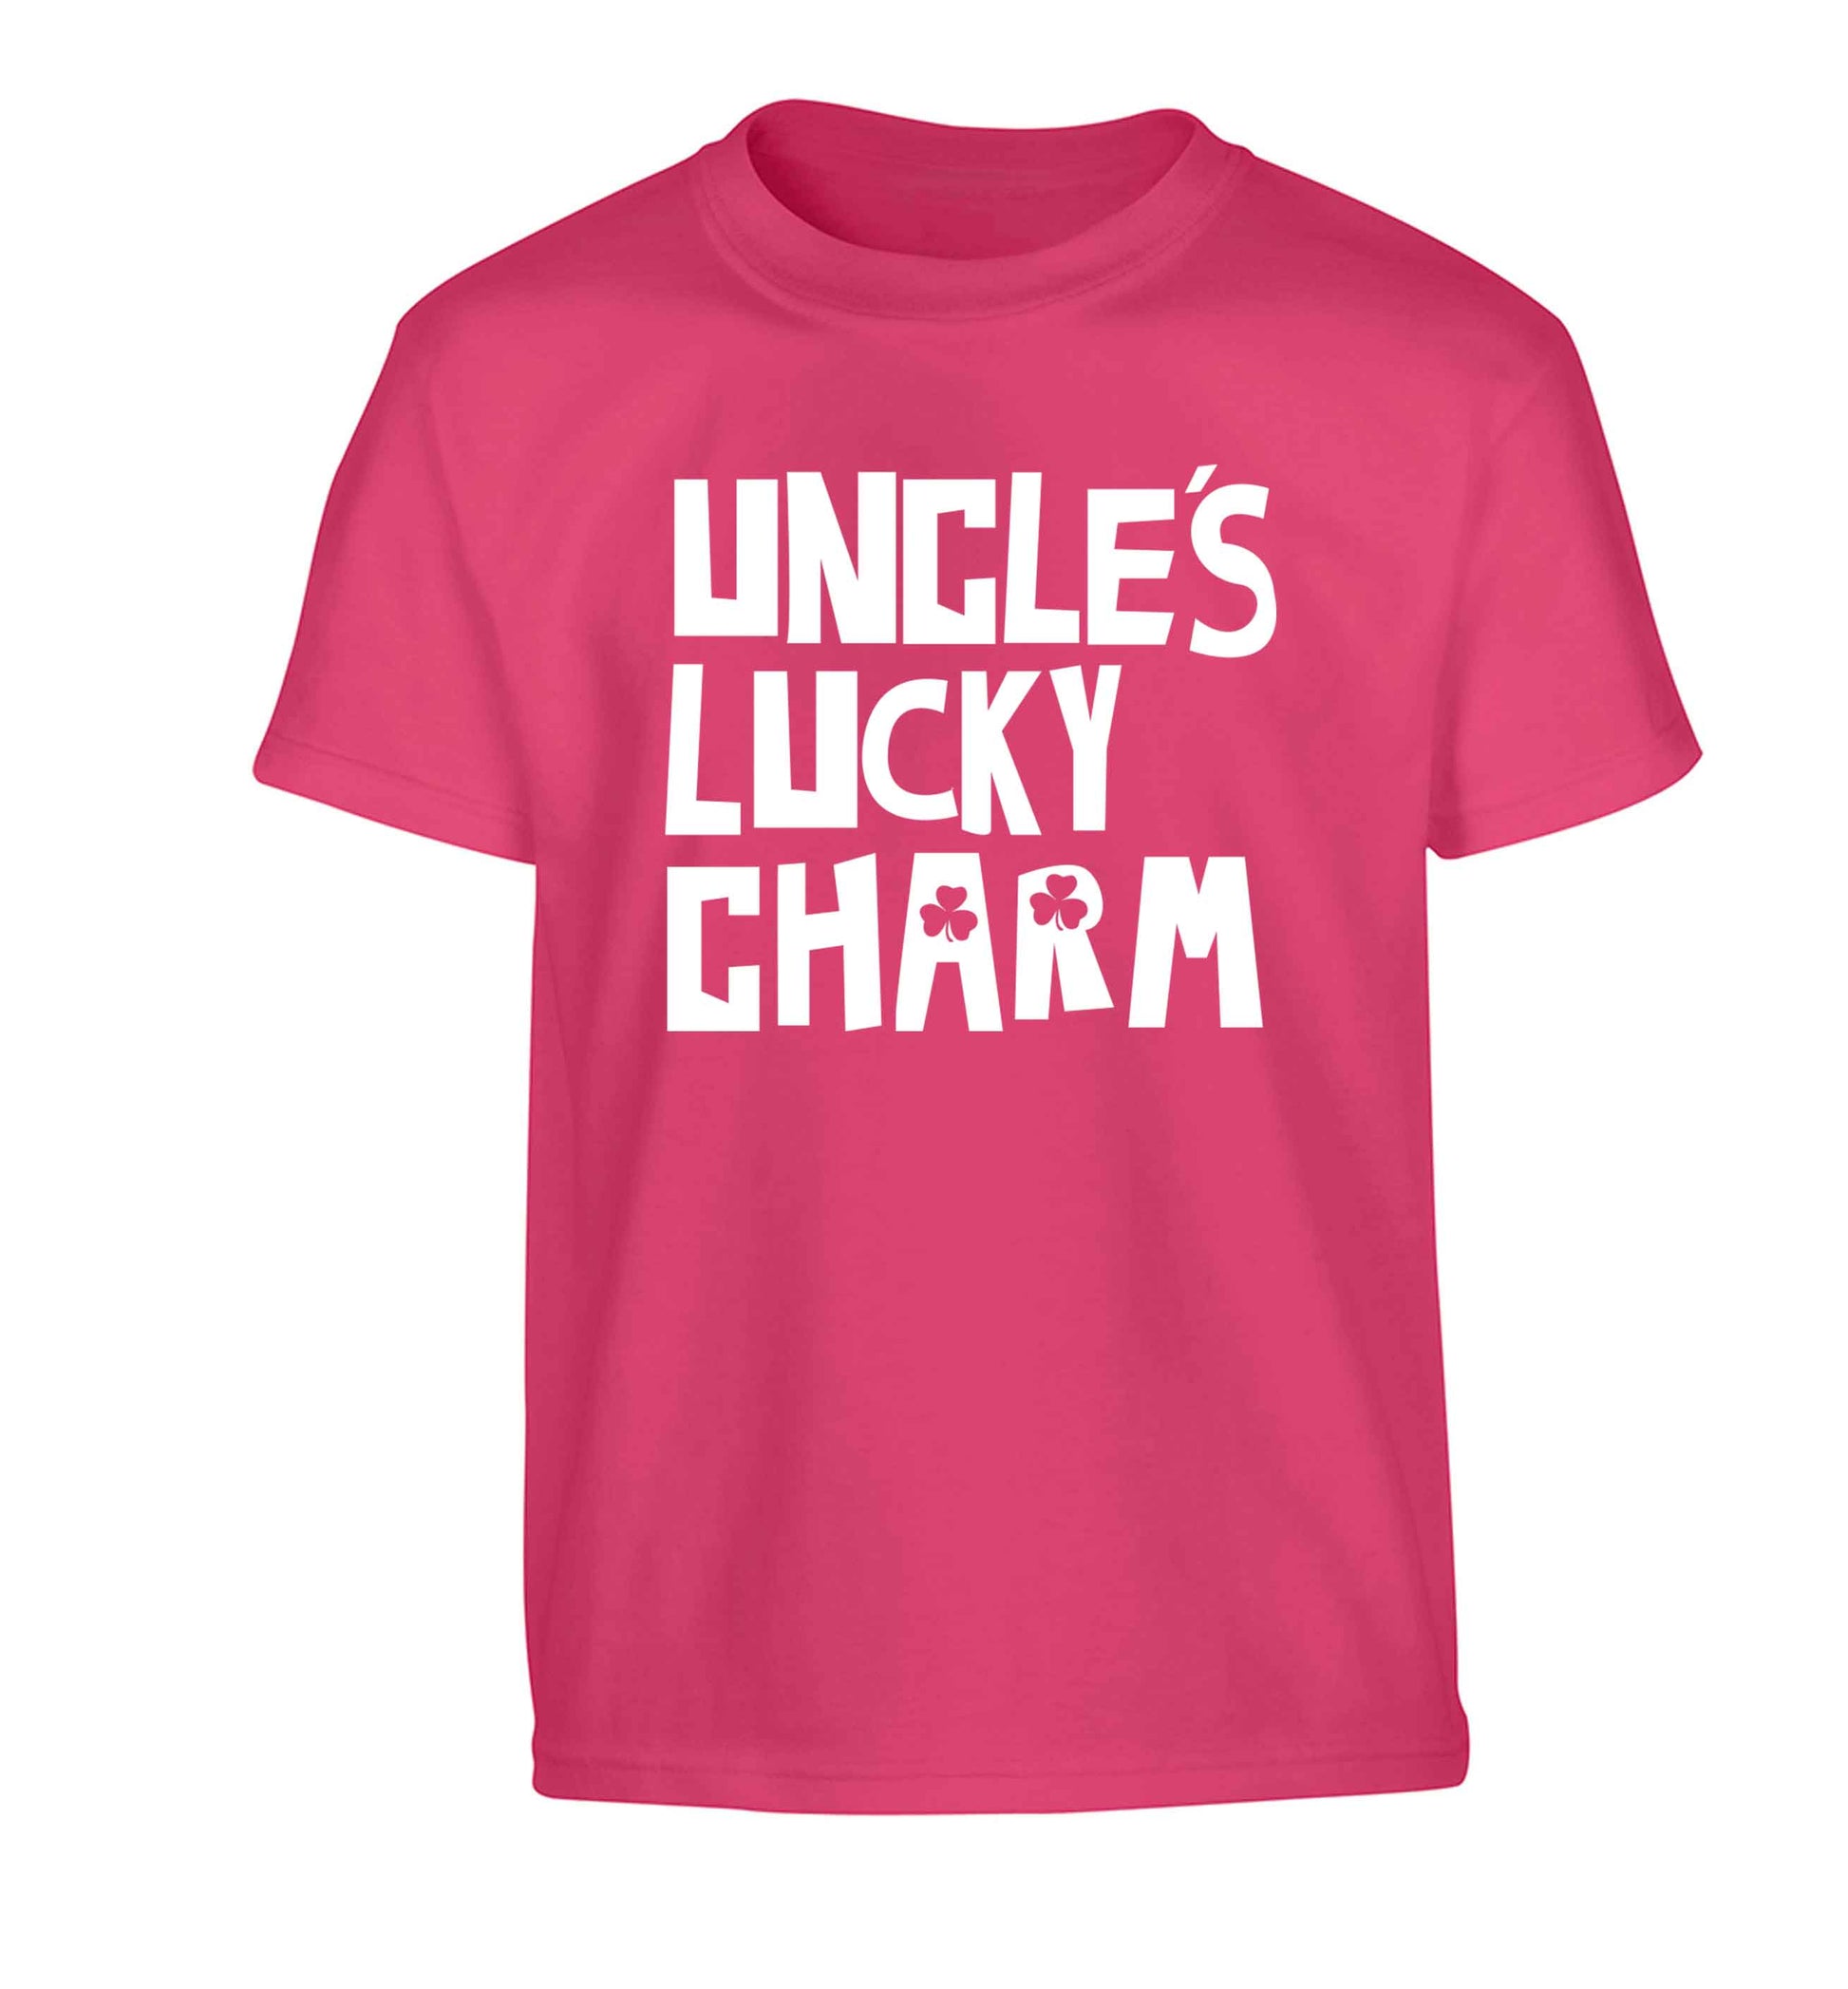 Uncles lucky charm Children's pink Tshirt 12-13 Years